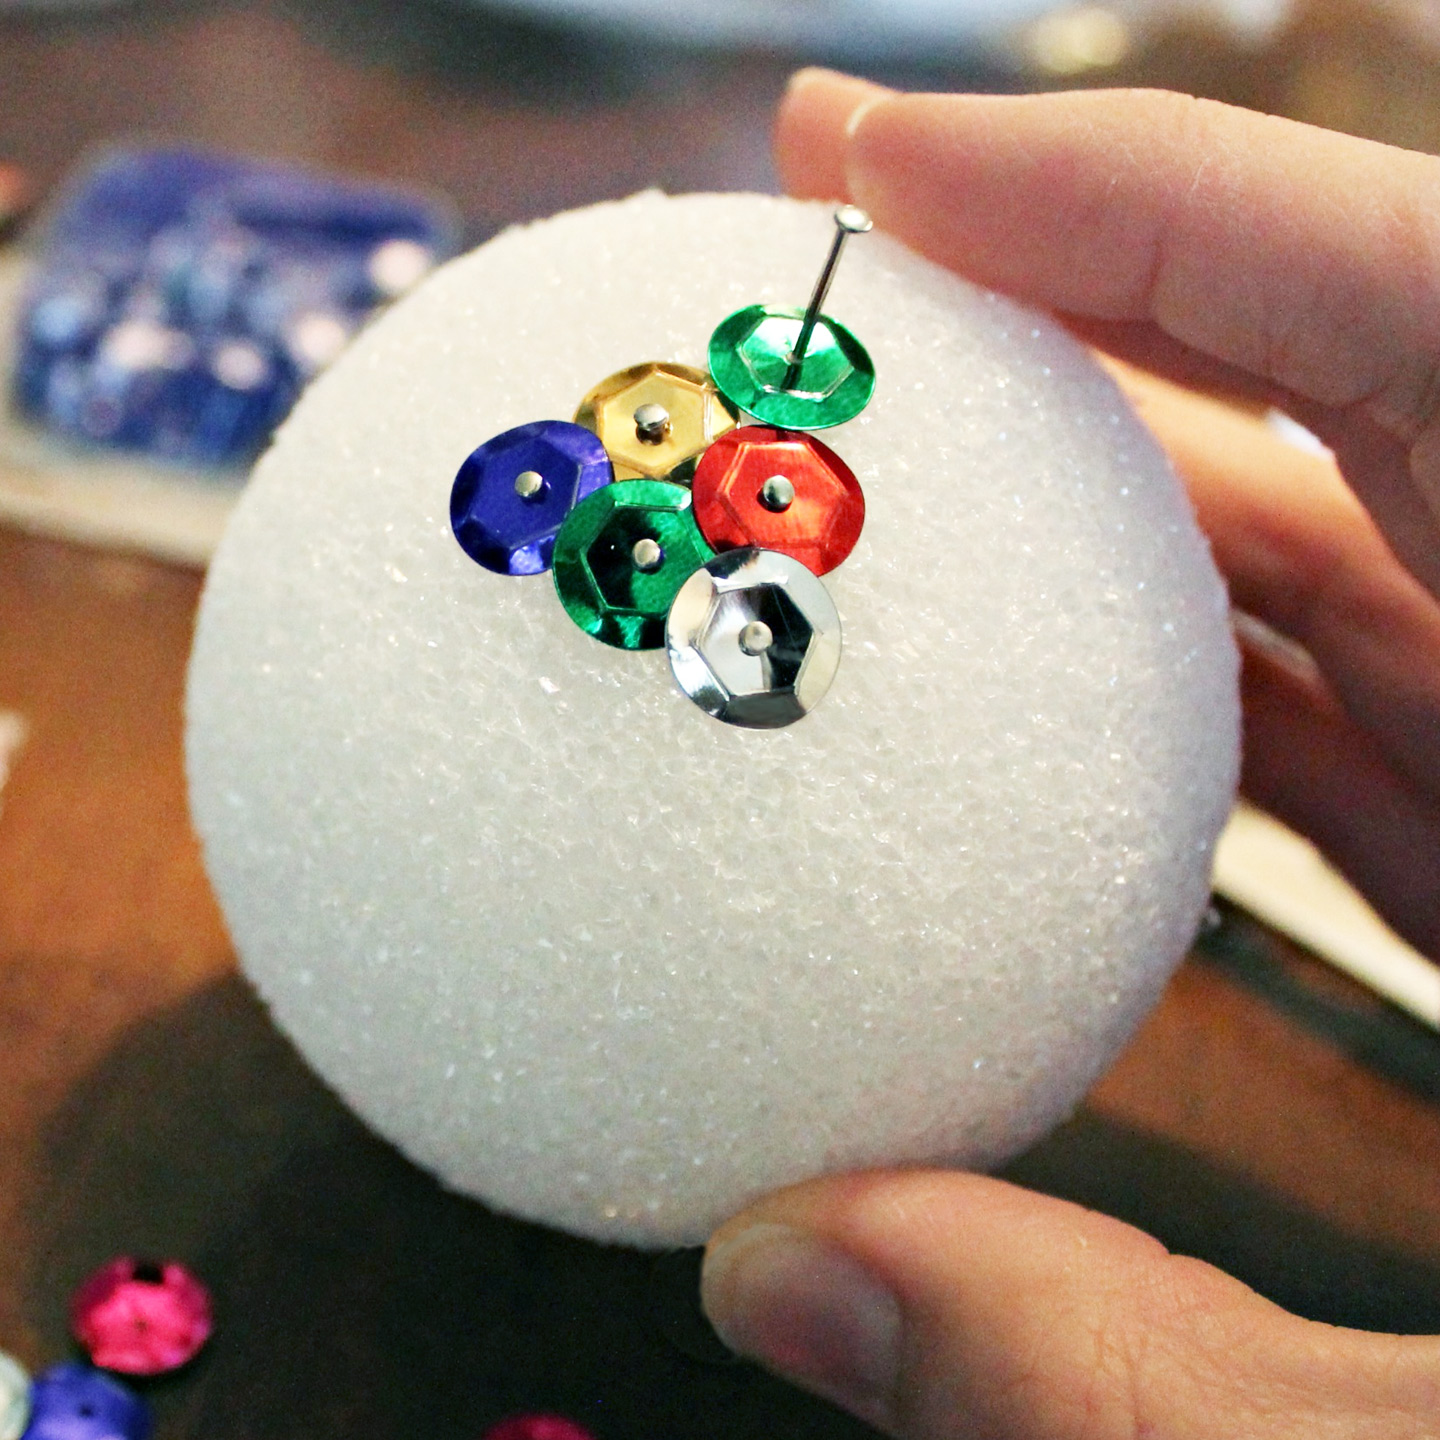 Pinning the sequin to the styrofoam ball - Sequin Christmas Ornament